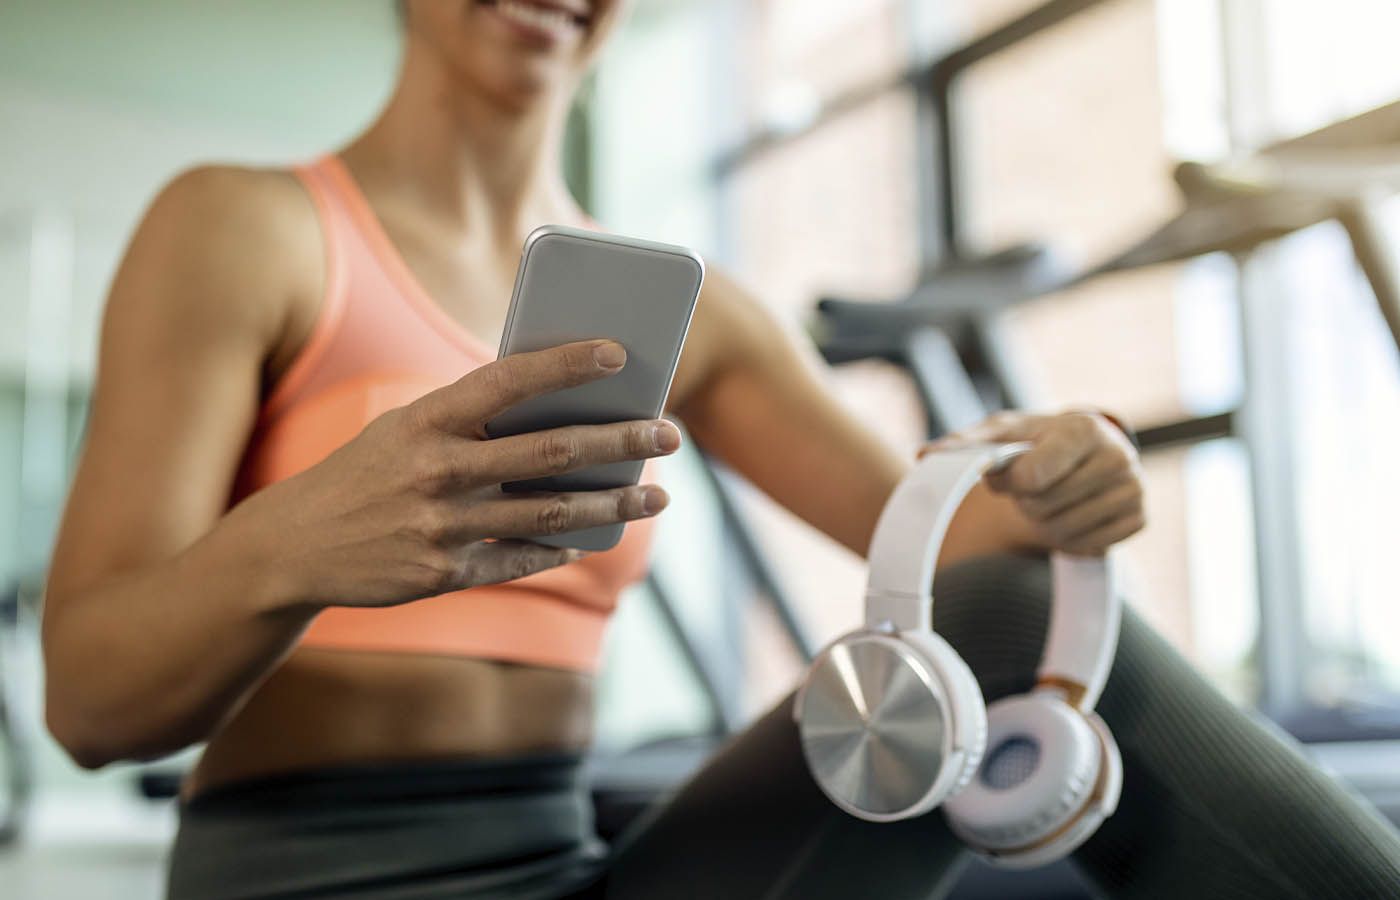 Creating a cardio workout playlist helps make workouts less boring